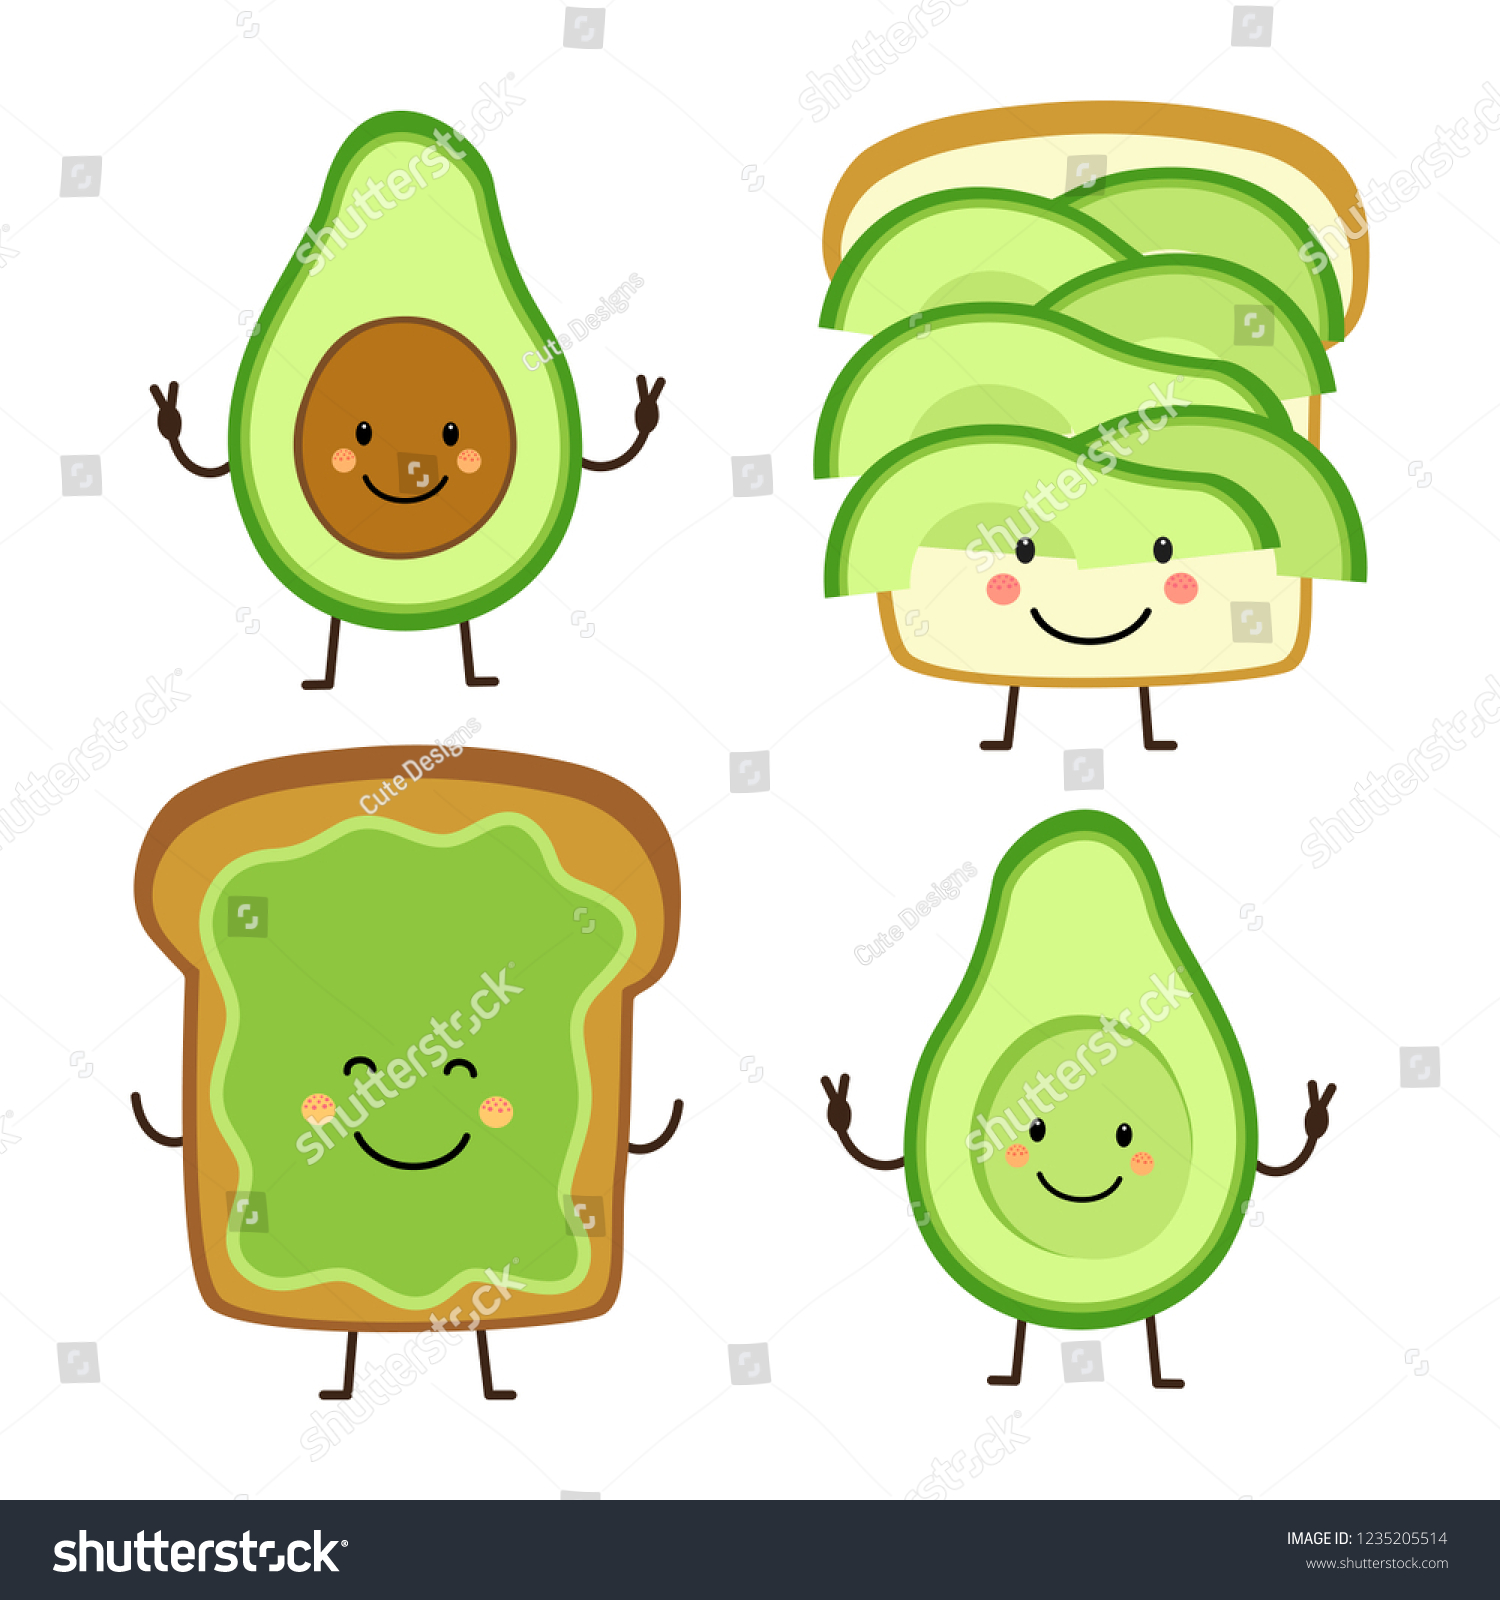 SVG of Cute hand drawn cartoon characters of avocado and toast svg